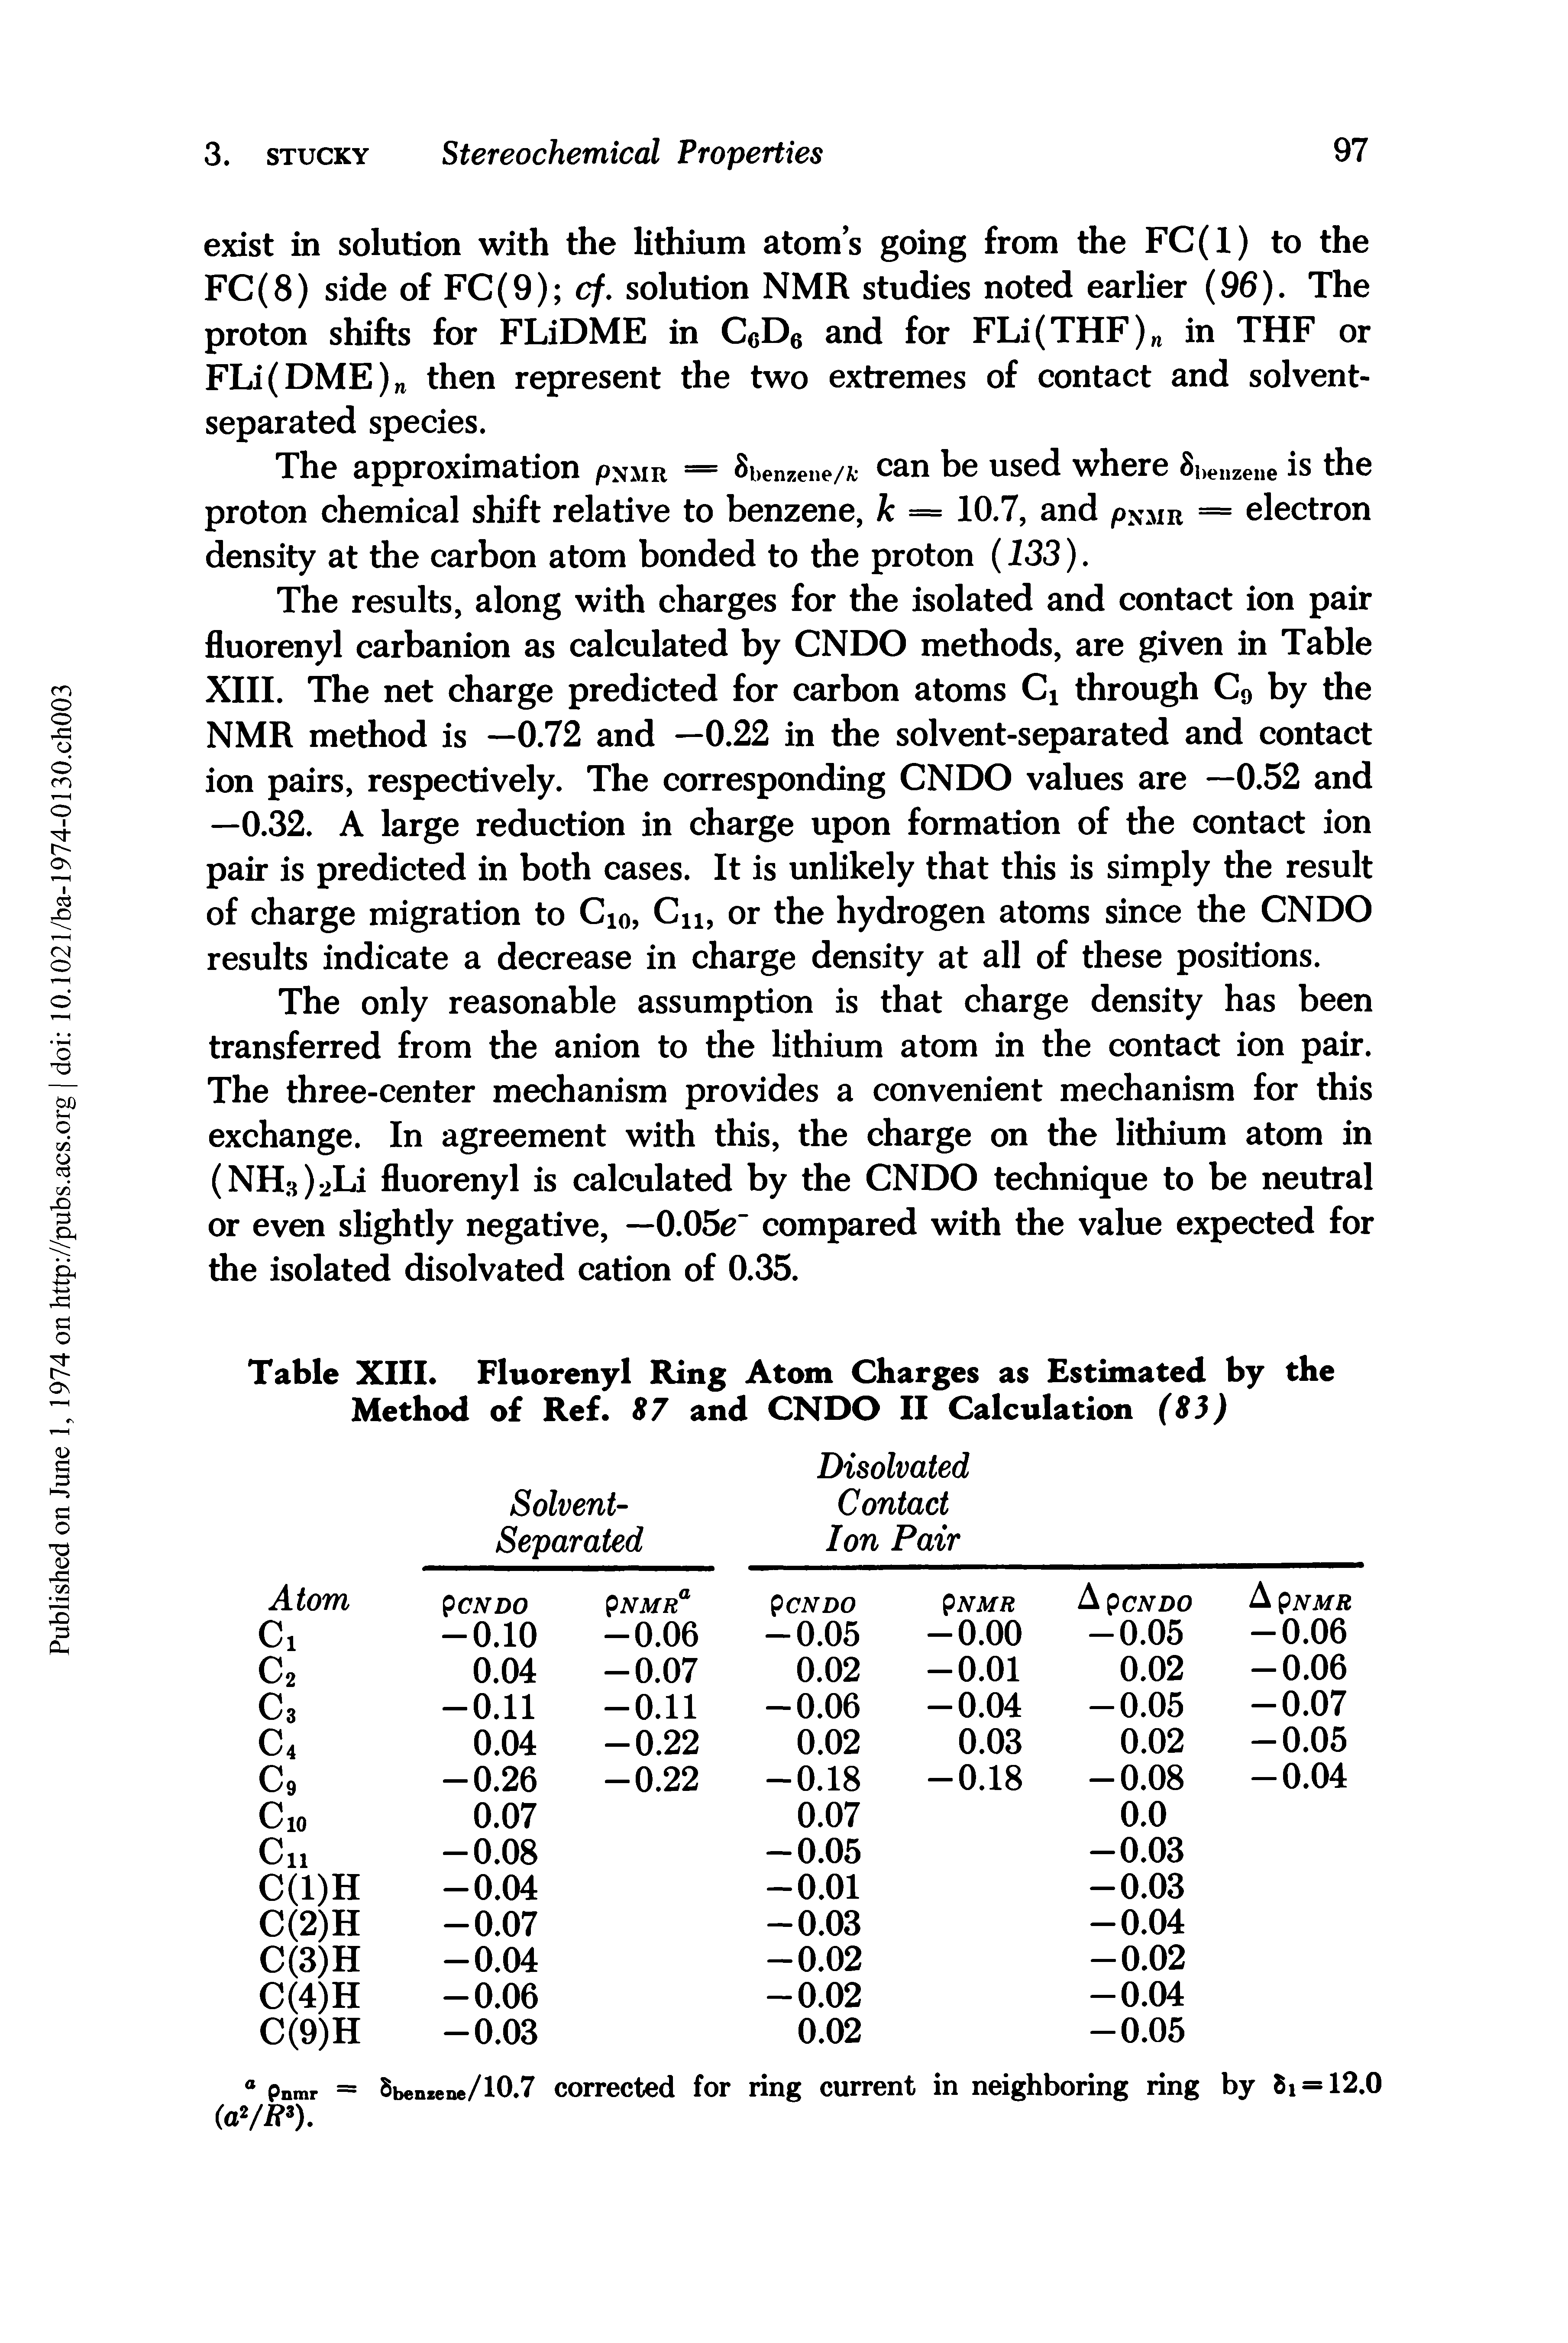 Table XIII. Fluorenyl Ring Atom Charges as Estimated by the Method of Ref. 87 and CNDO II Calculation (83)...